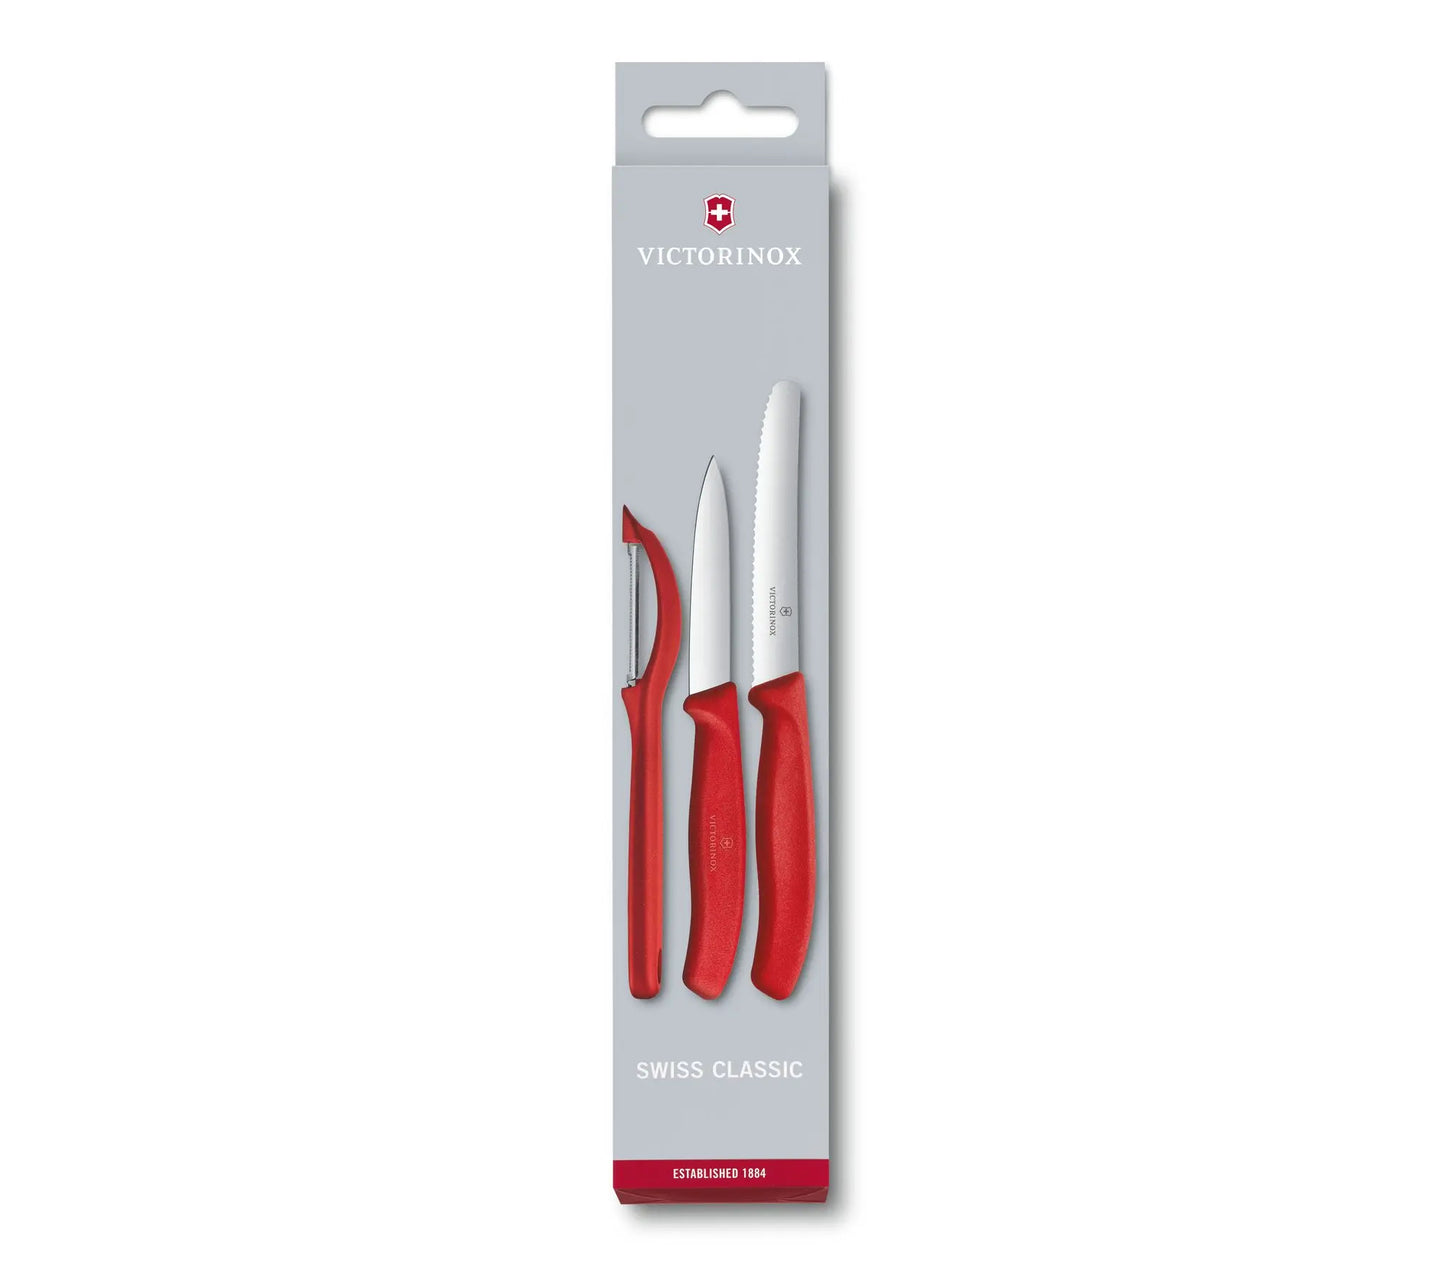 Victorinox Swiss Classic Paring Knife Set With Peeler 3 Pieces - Red